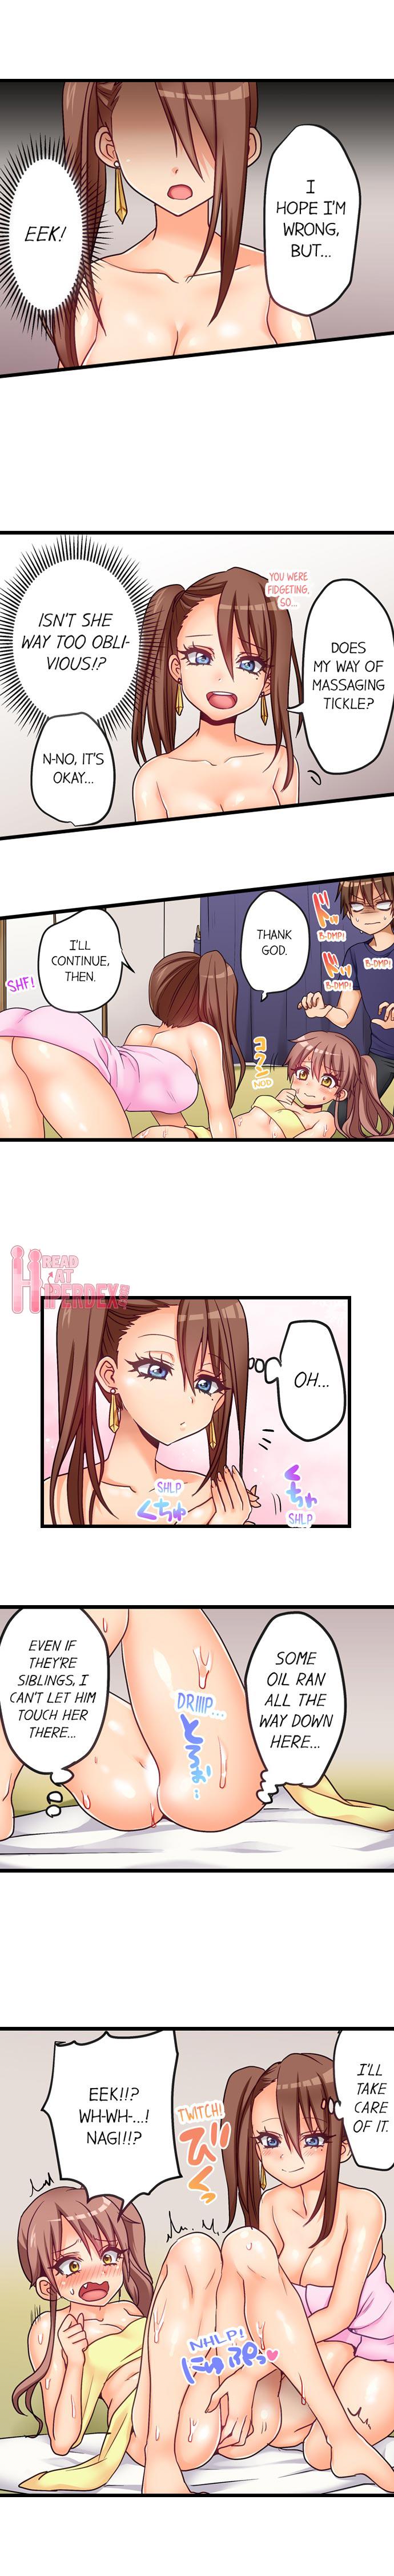 Muscle Porori] My First Time is with.... My Little Sister?! - Original Hairypussy - Page 5